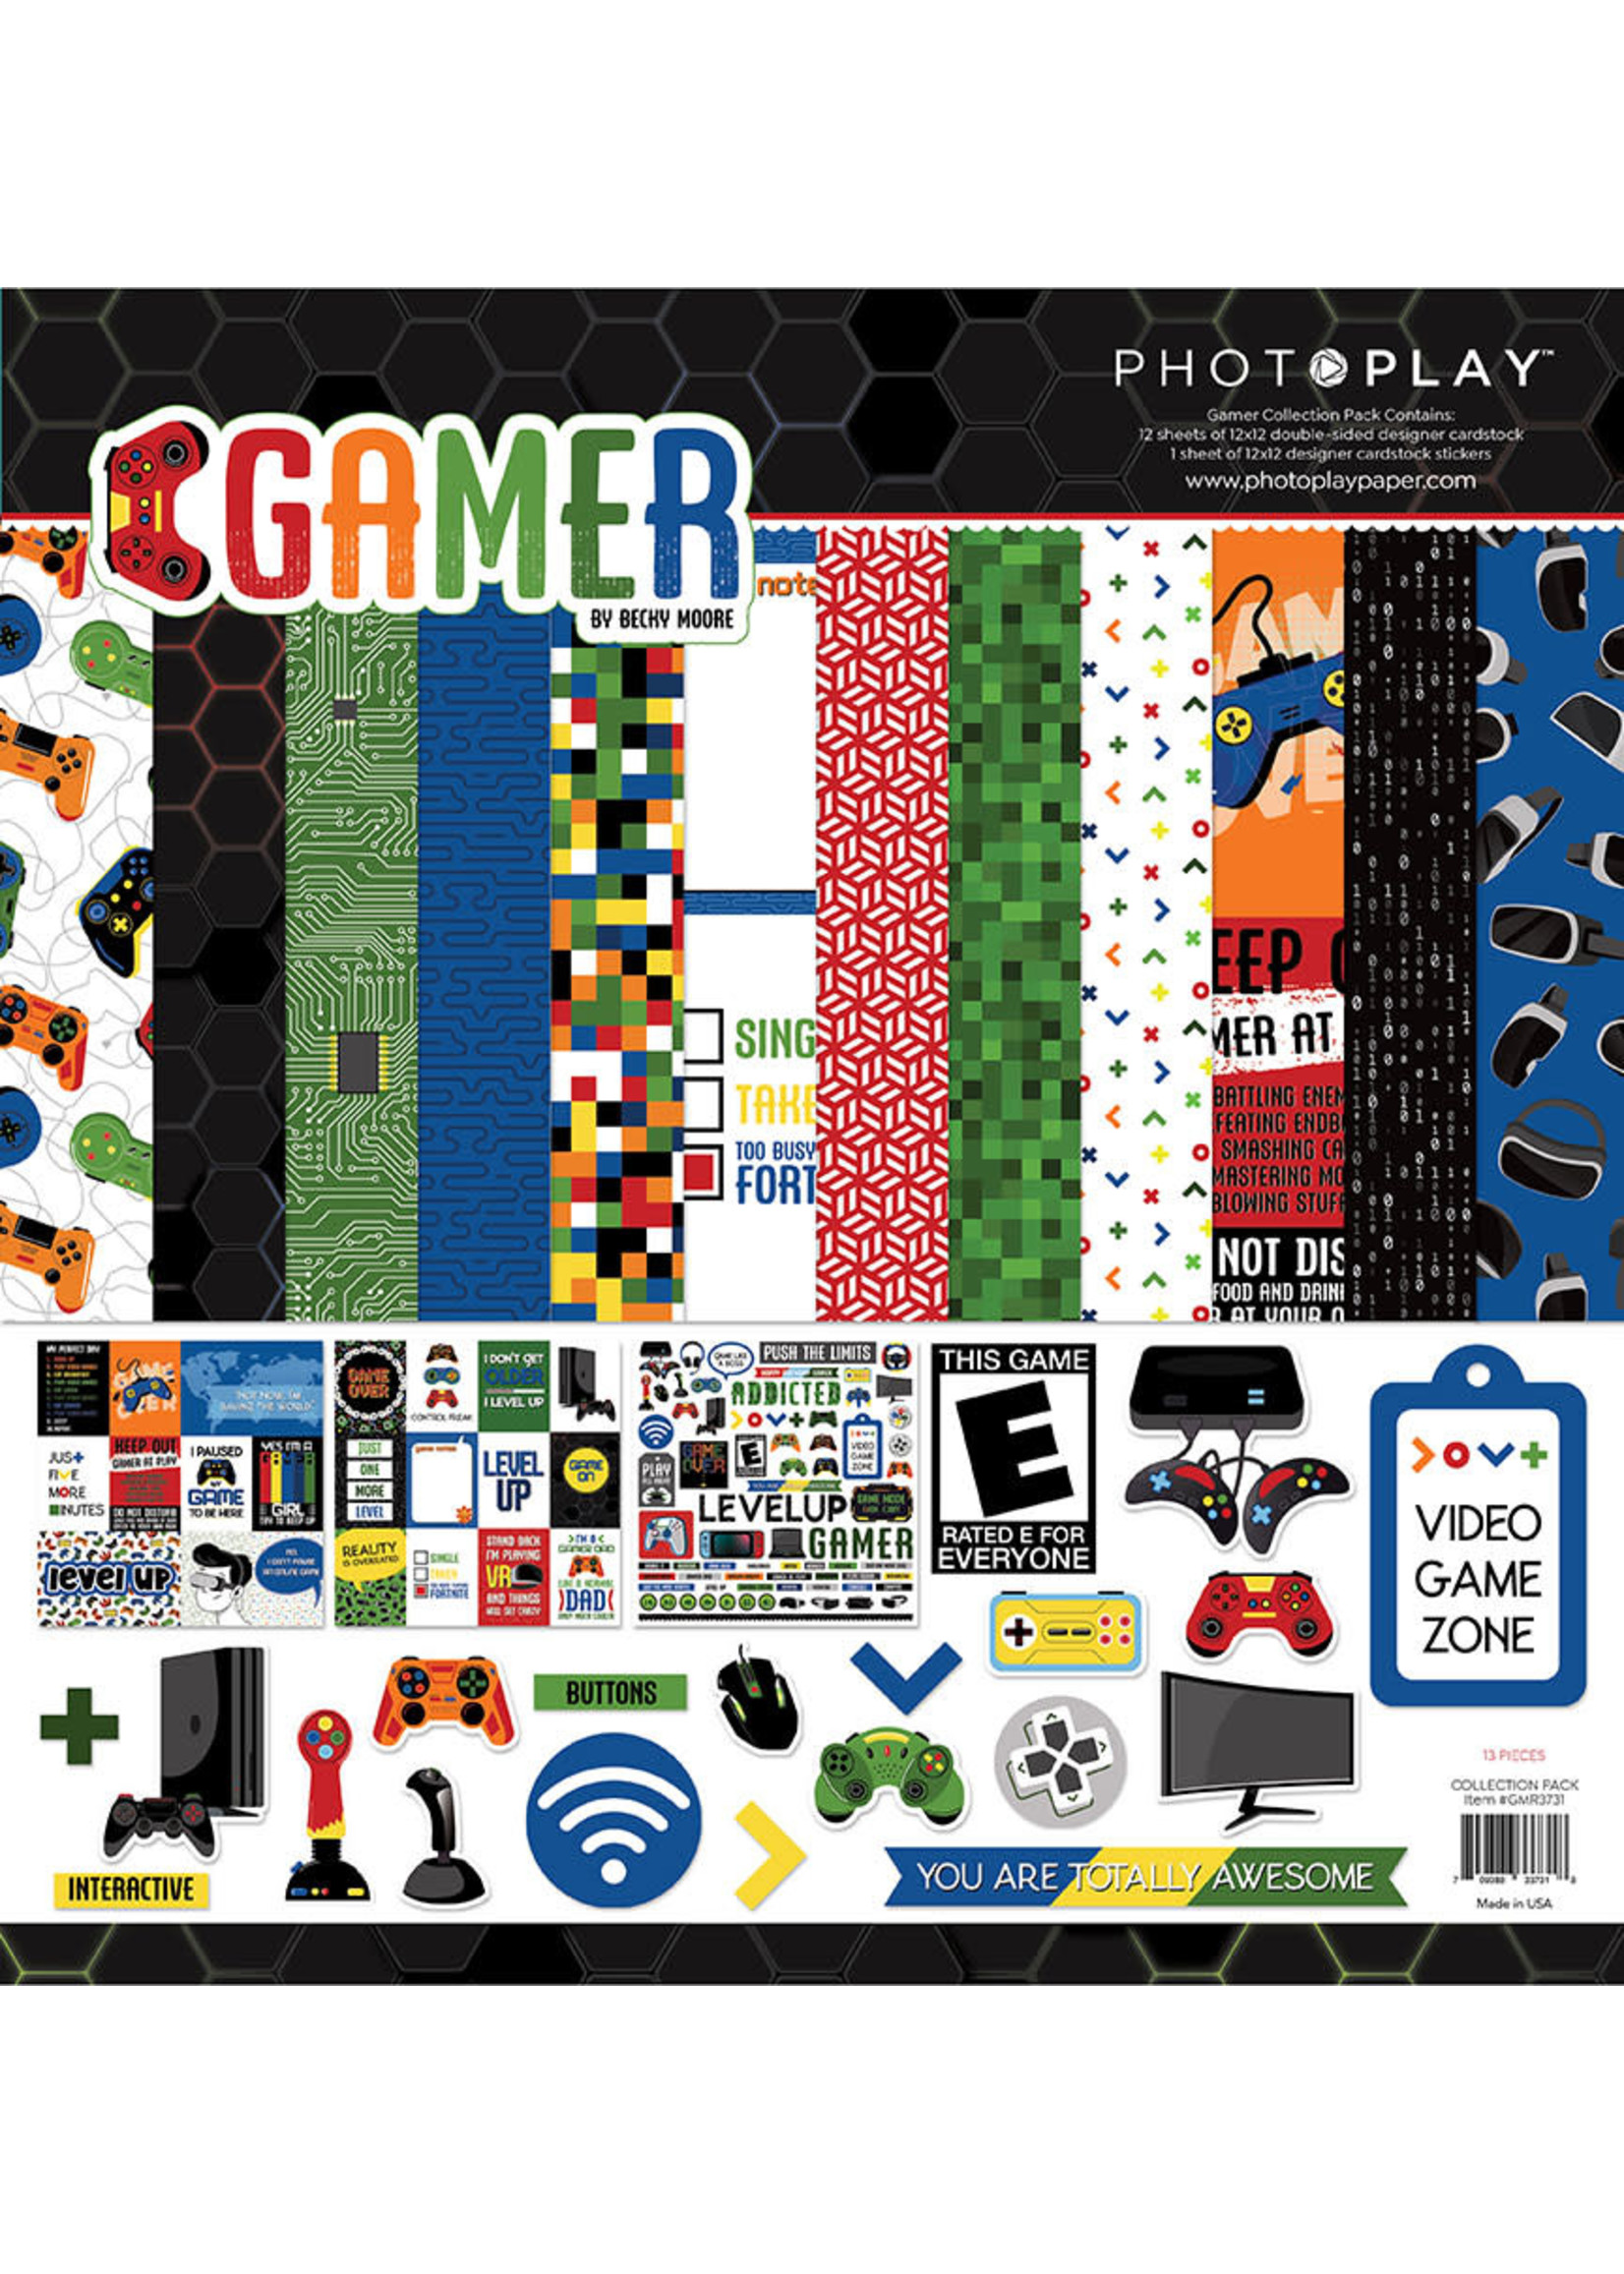 Photoplay Gamer Collection Pack